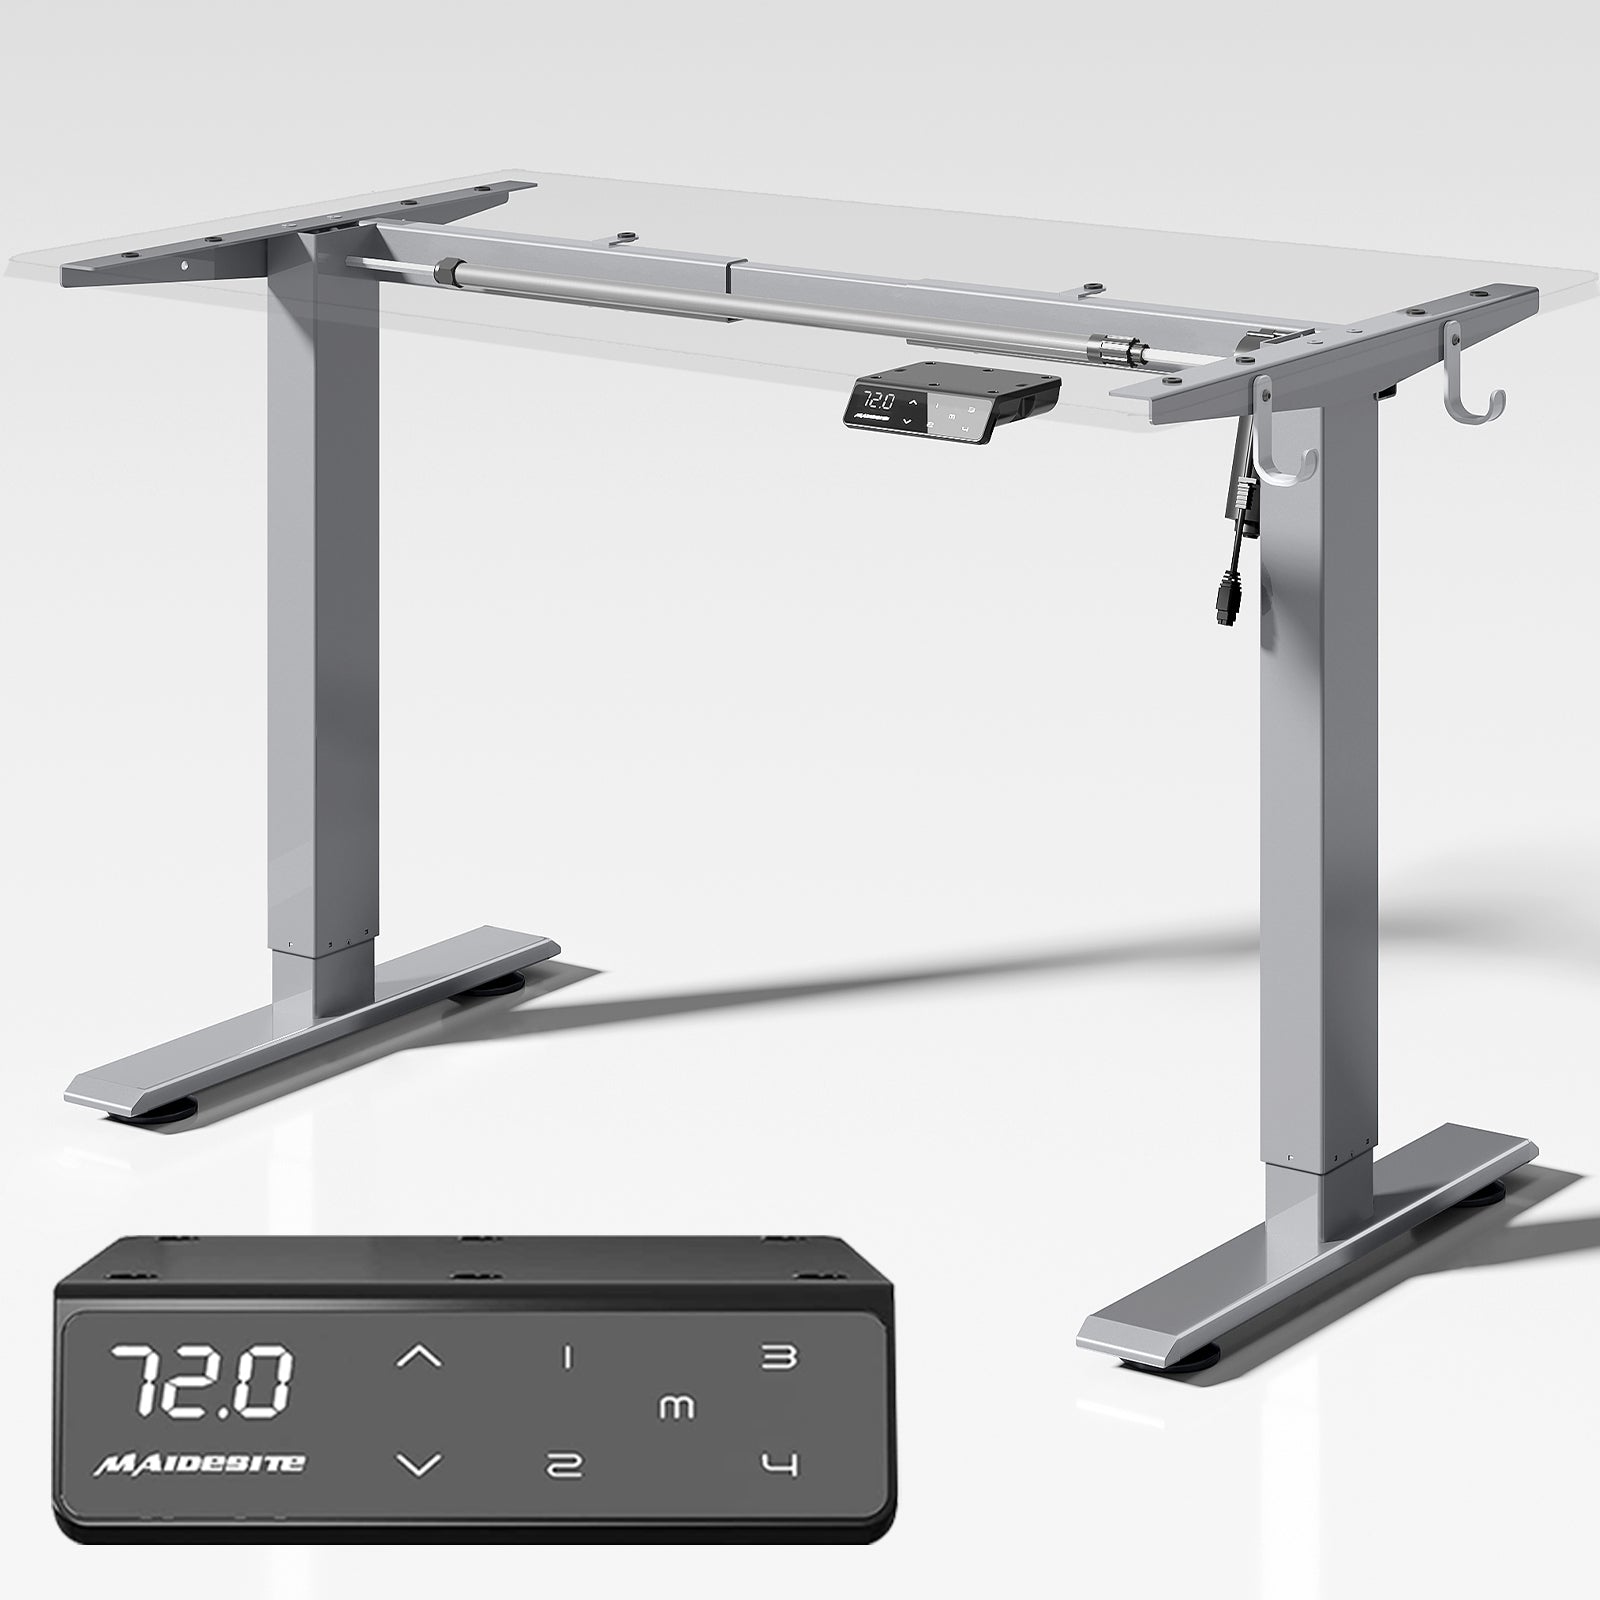 Maidesite T1 Basic - Electric Height-Adjustable Standing Desk Grey Frame